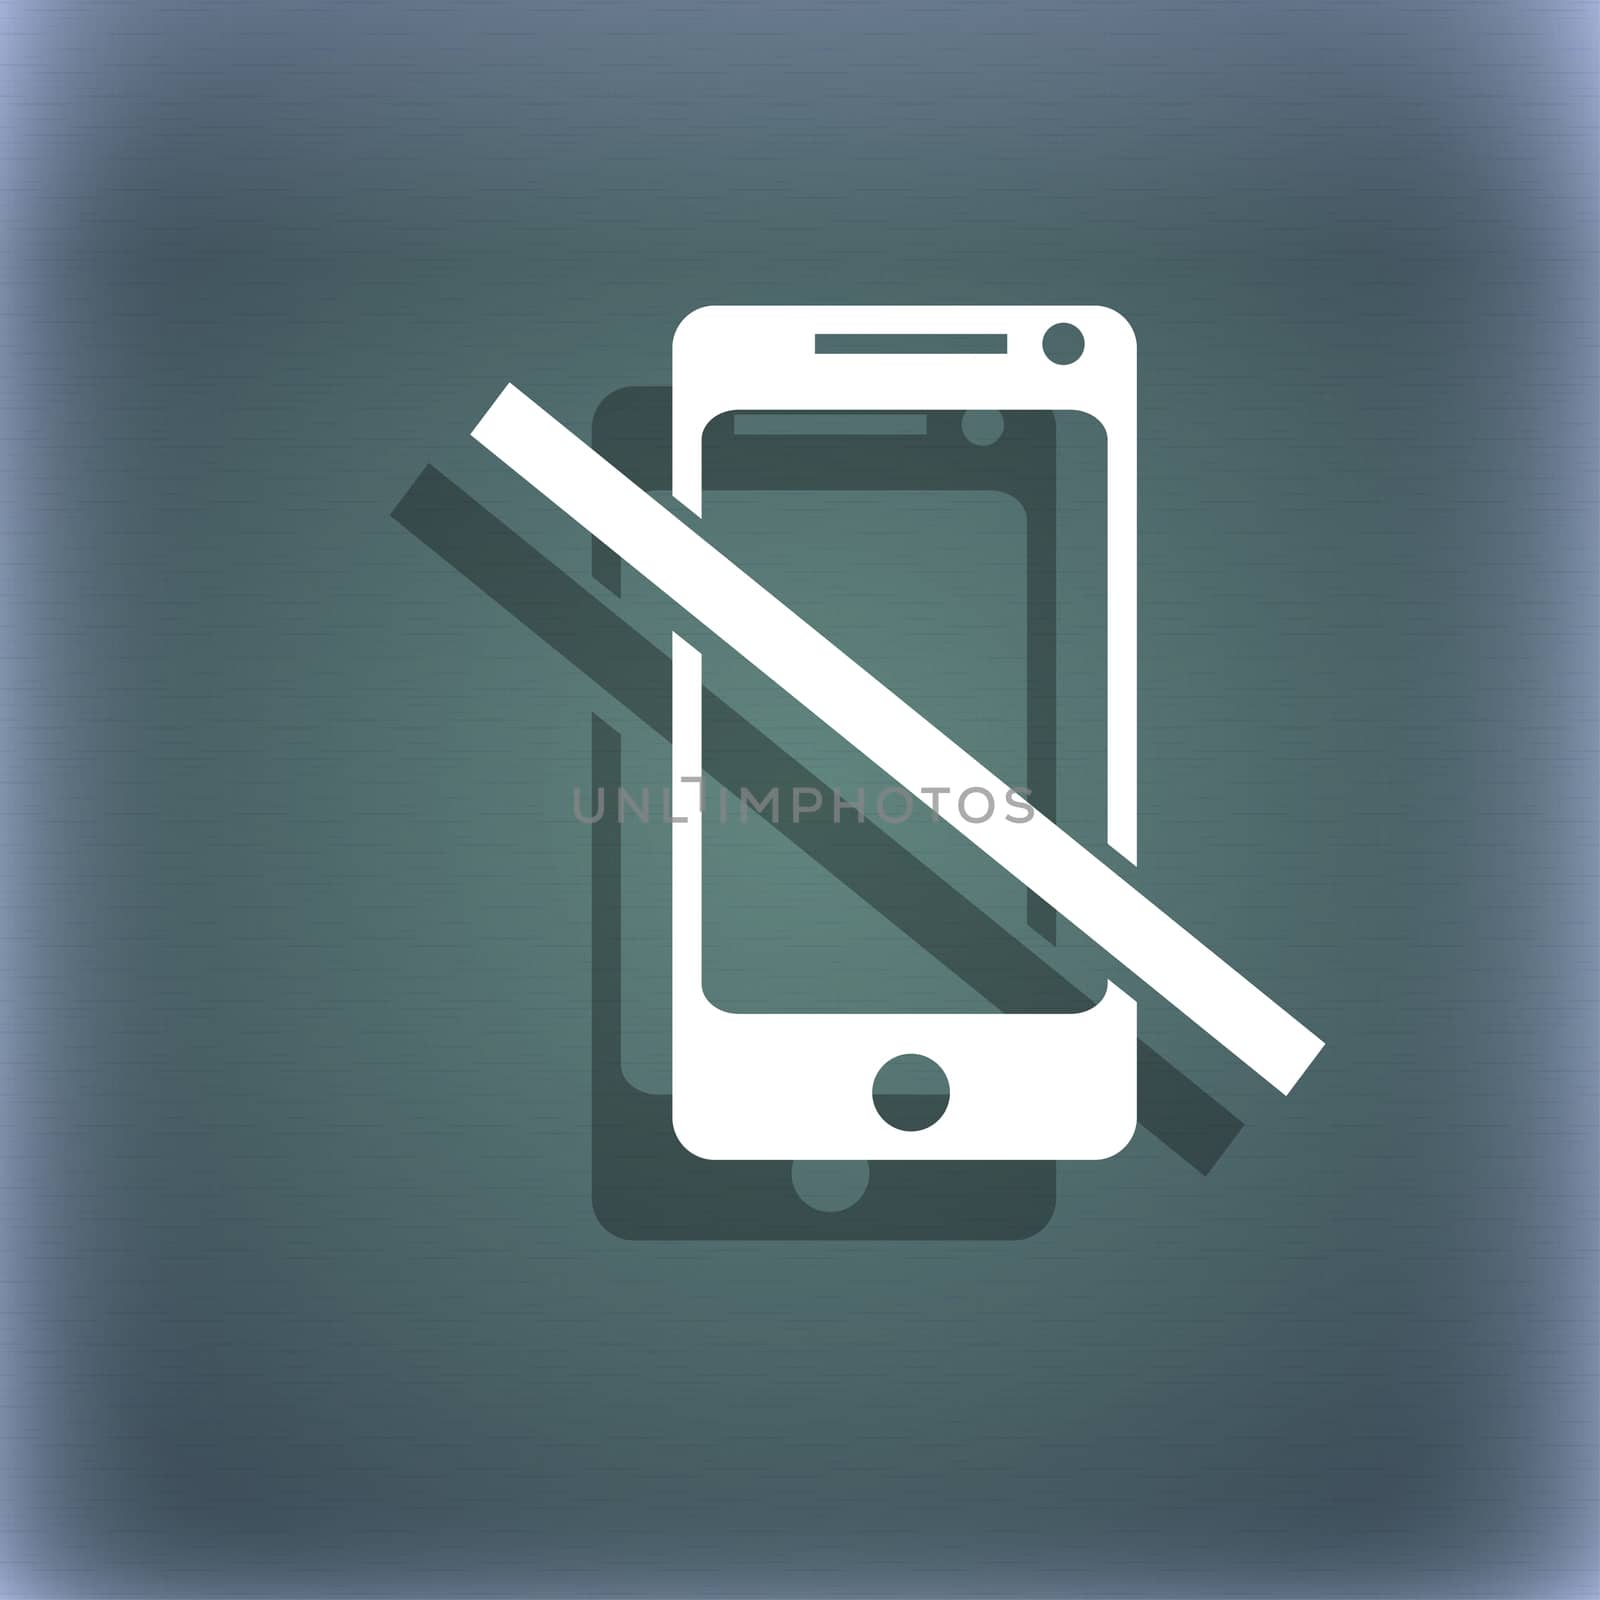 Do not call. Smartphone signs icon. Support symbol. On the blue-green abstract background with shadow and space for your text.  by serhii_lohvyniuk